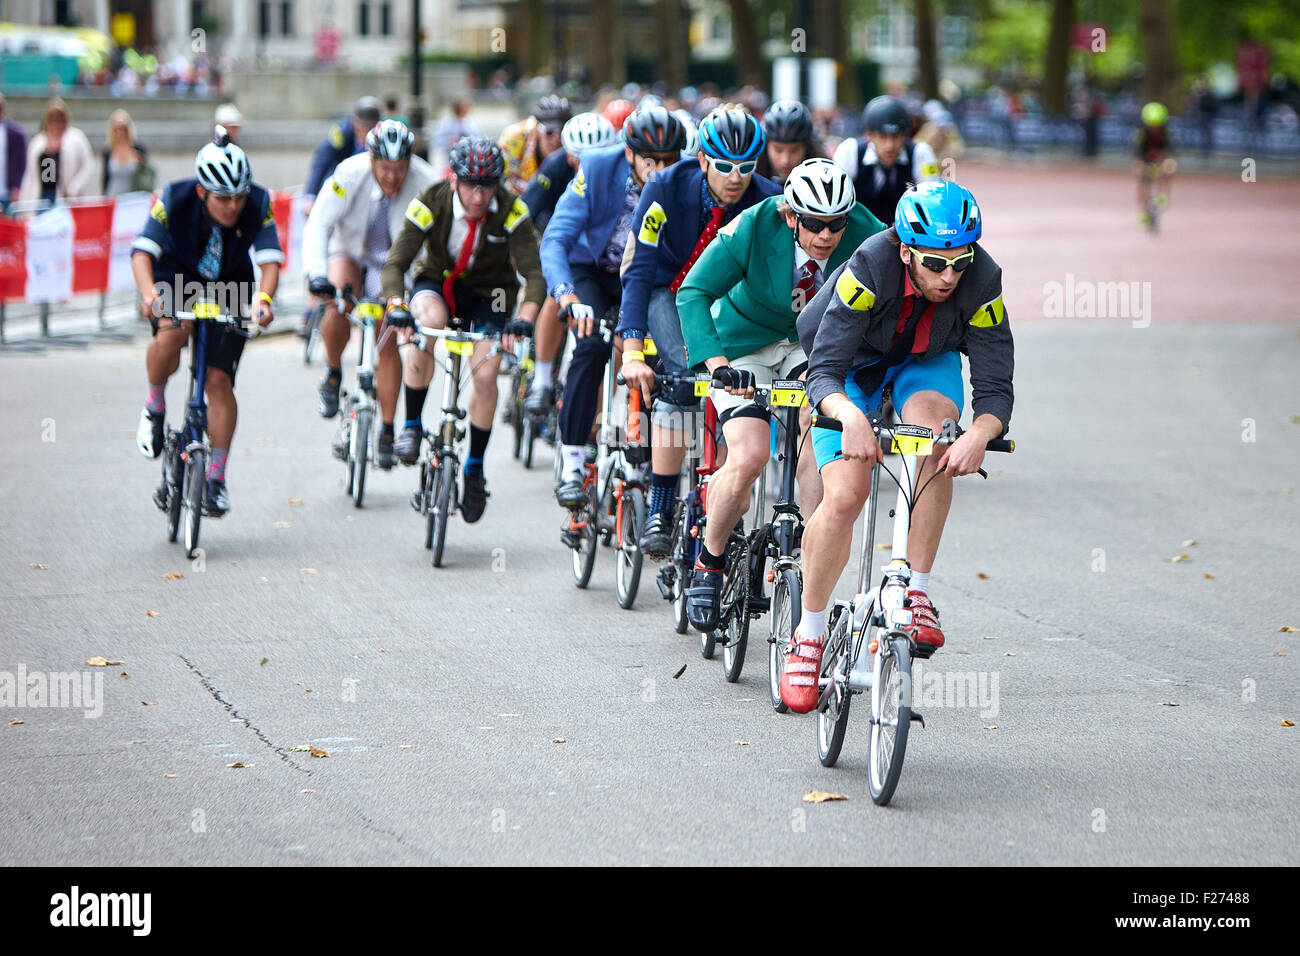 Competitors take part in the 10th Brompton World Championship bike race in St James' Park Stock Photo